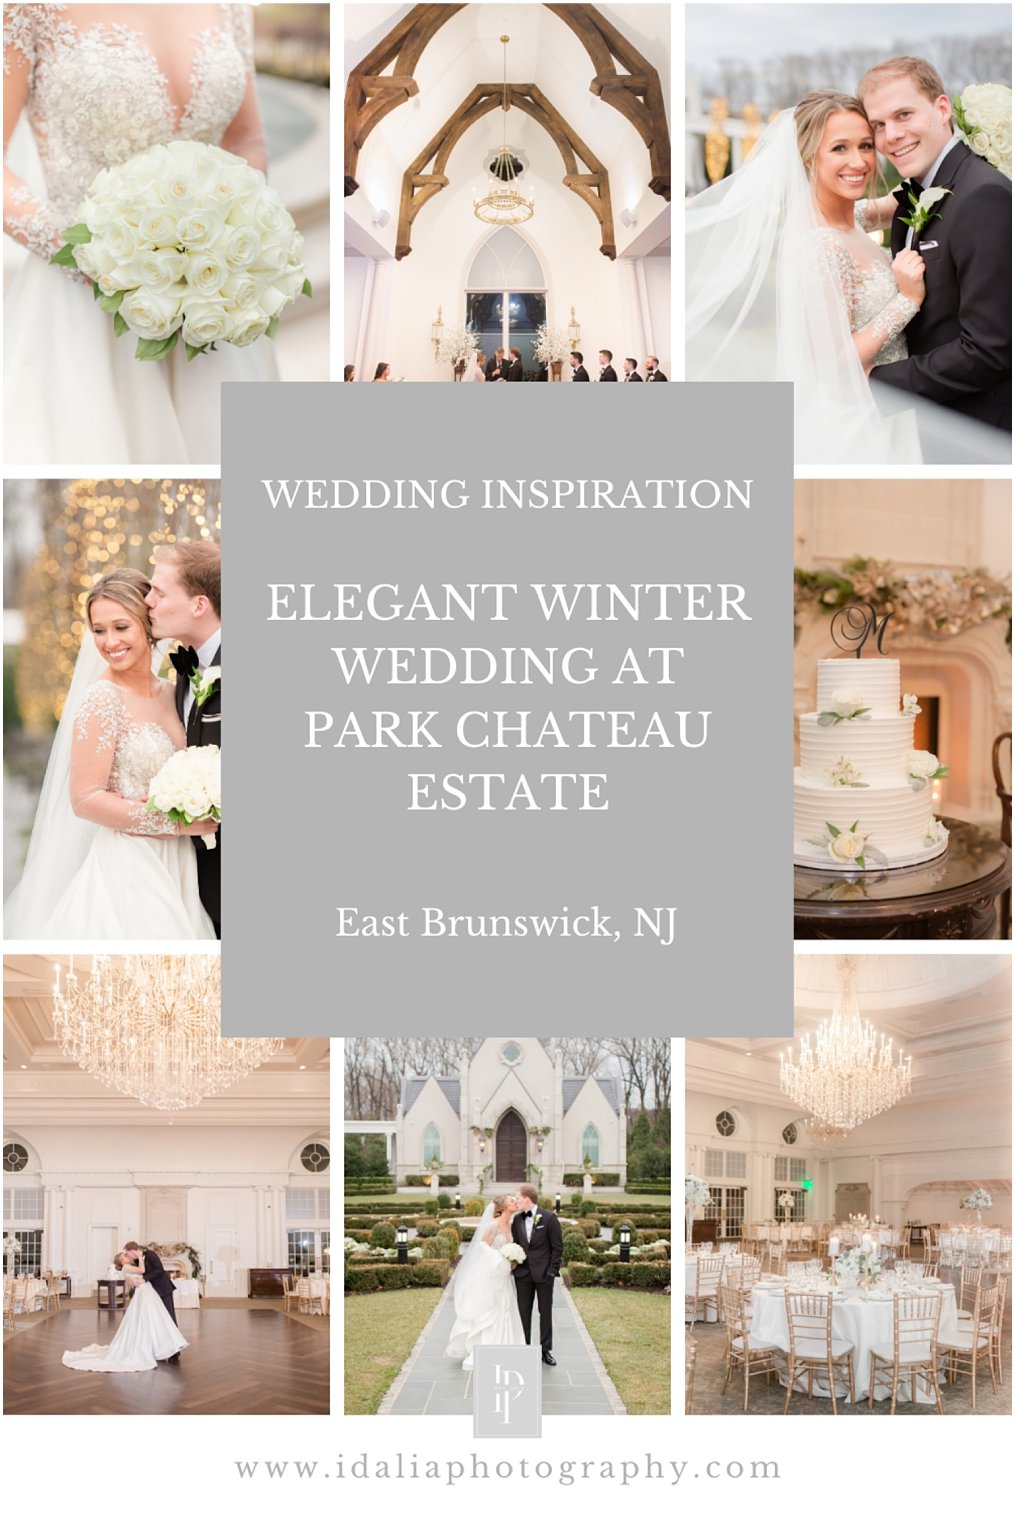 Take a peek at this classic winter wedding at Park Chateau Estate and Gardens | Photos by Idalia Photography